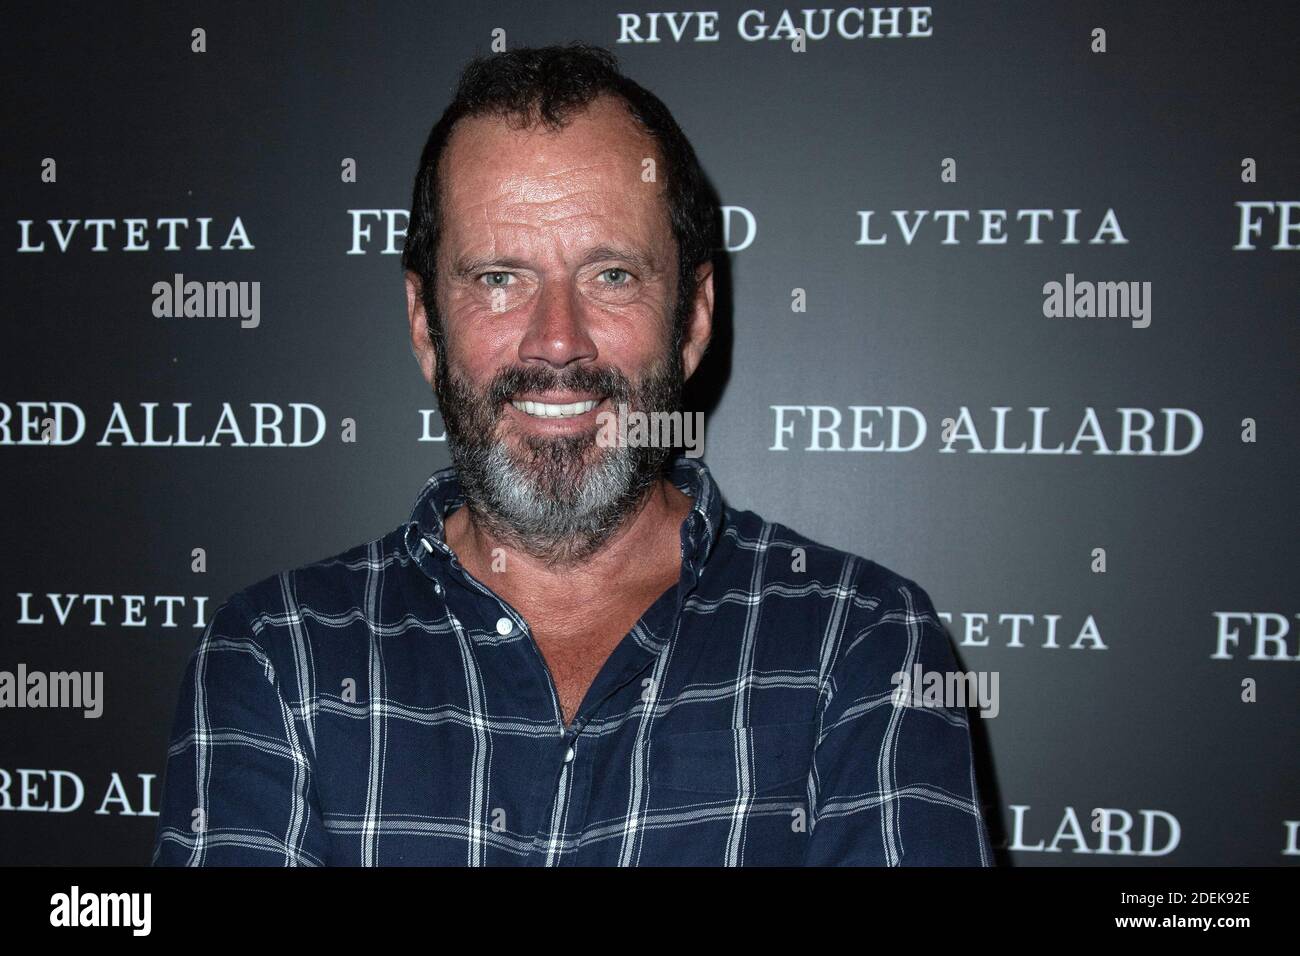 Christian Vadim attending the Fred Allard X LVUTETIA exhibition opening at the Lutetia Hotel in Paris, France on June 27, 2019. Photo by Aurore Marechal/ABACAPRESS.COM Stock Photo